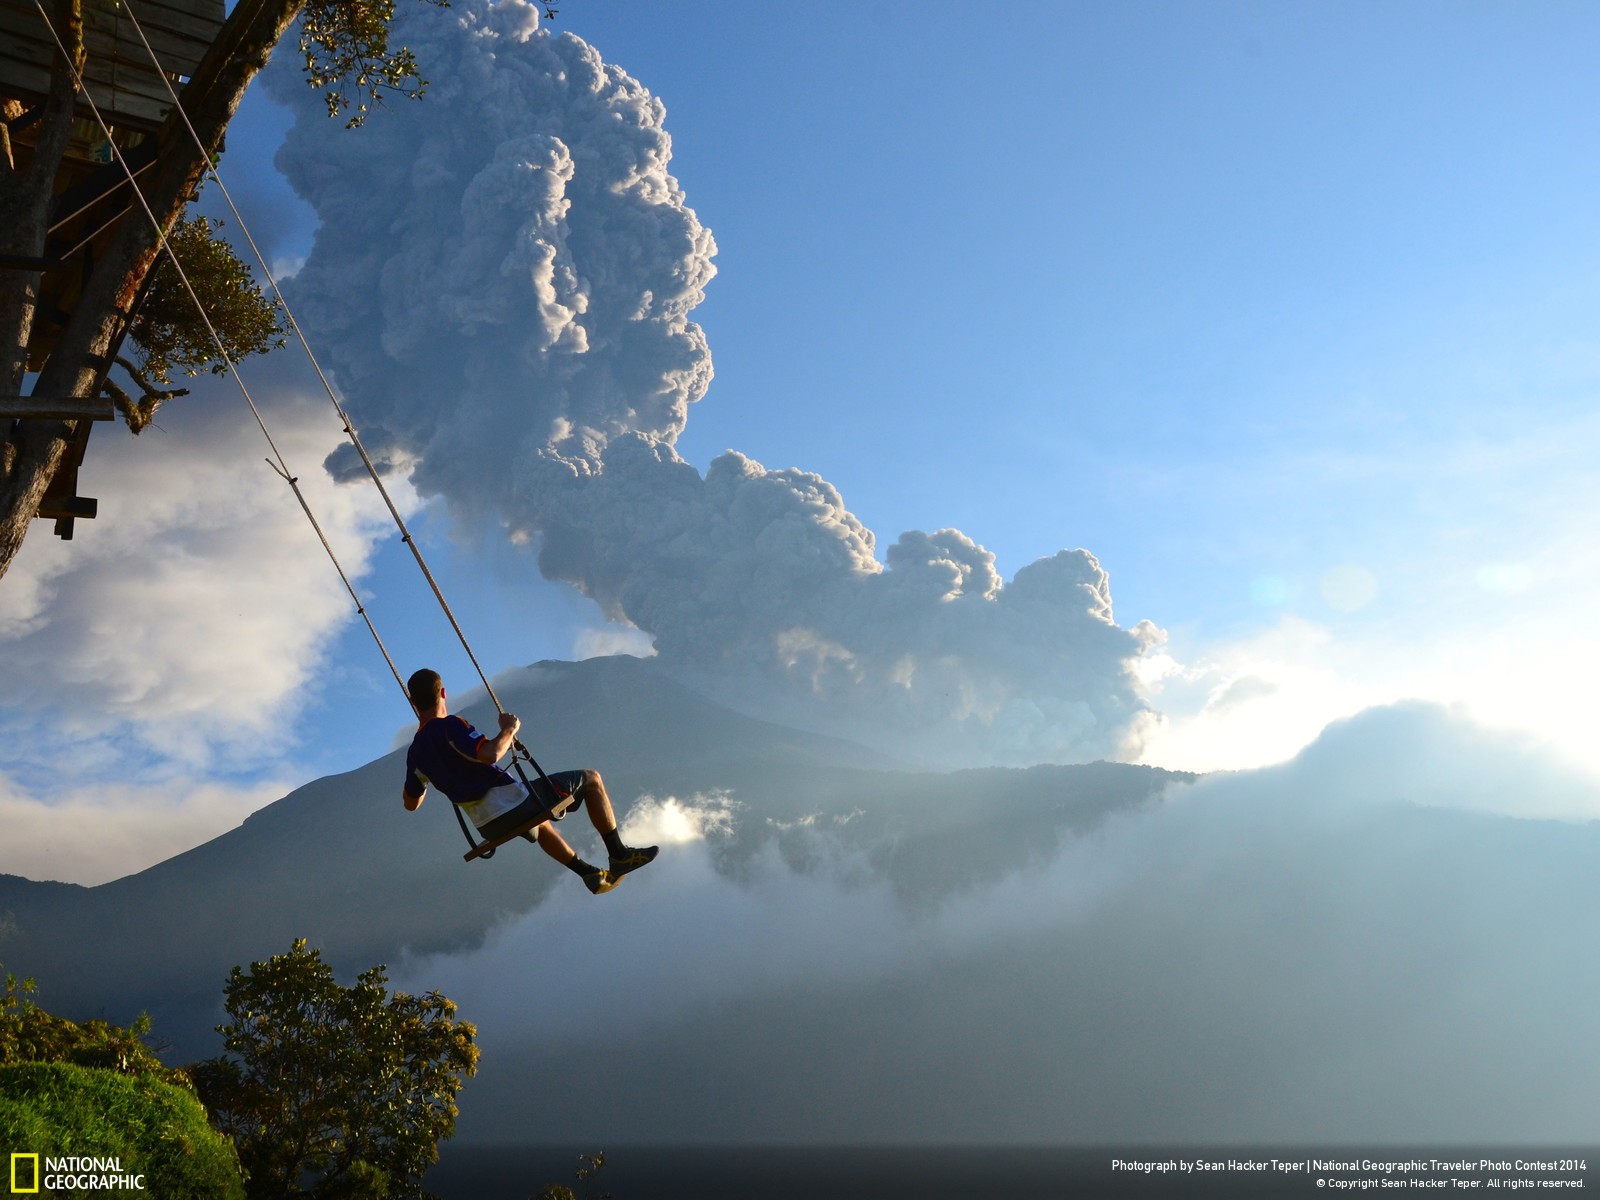 The Best National Geographic Readers’ Photos Of 2014